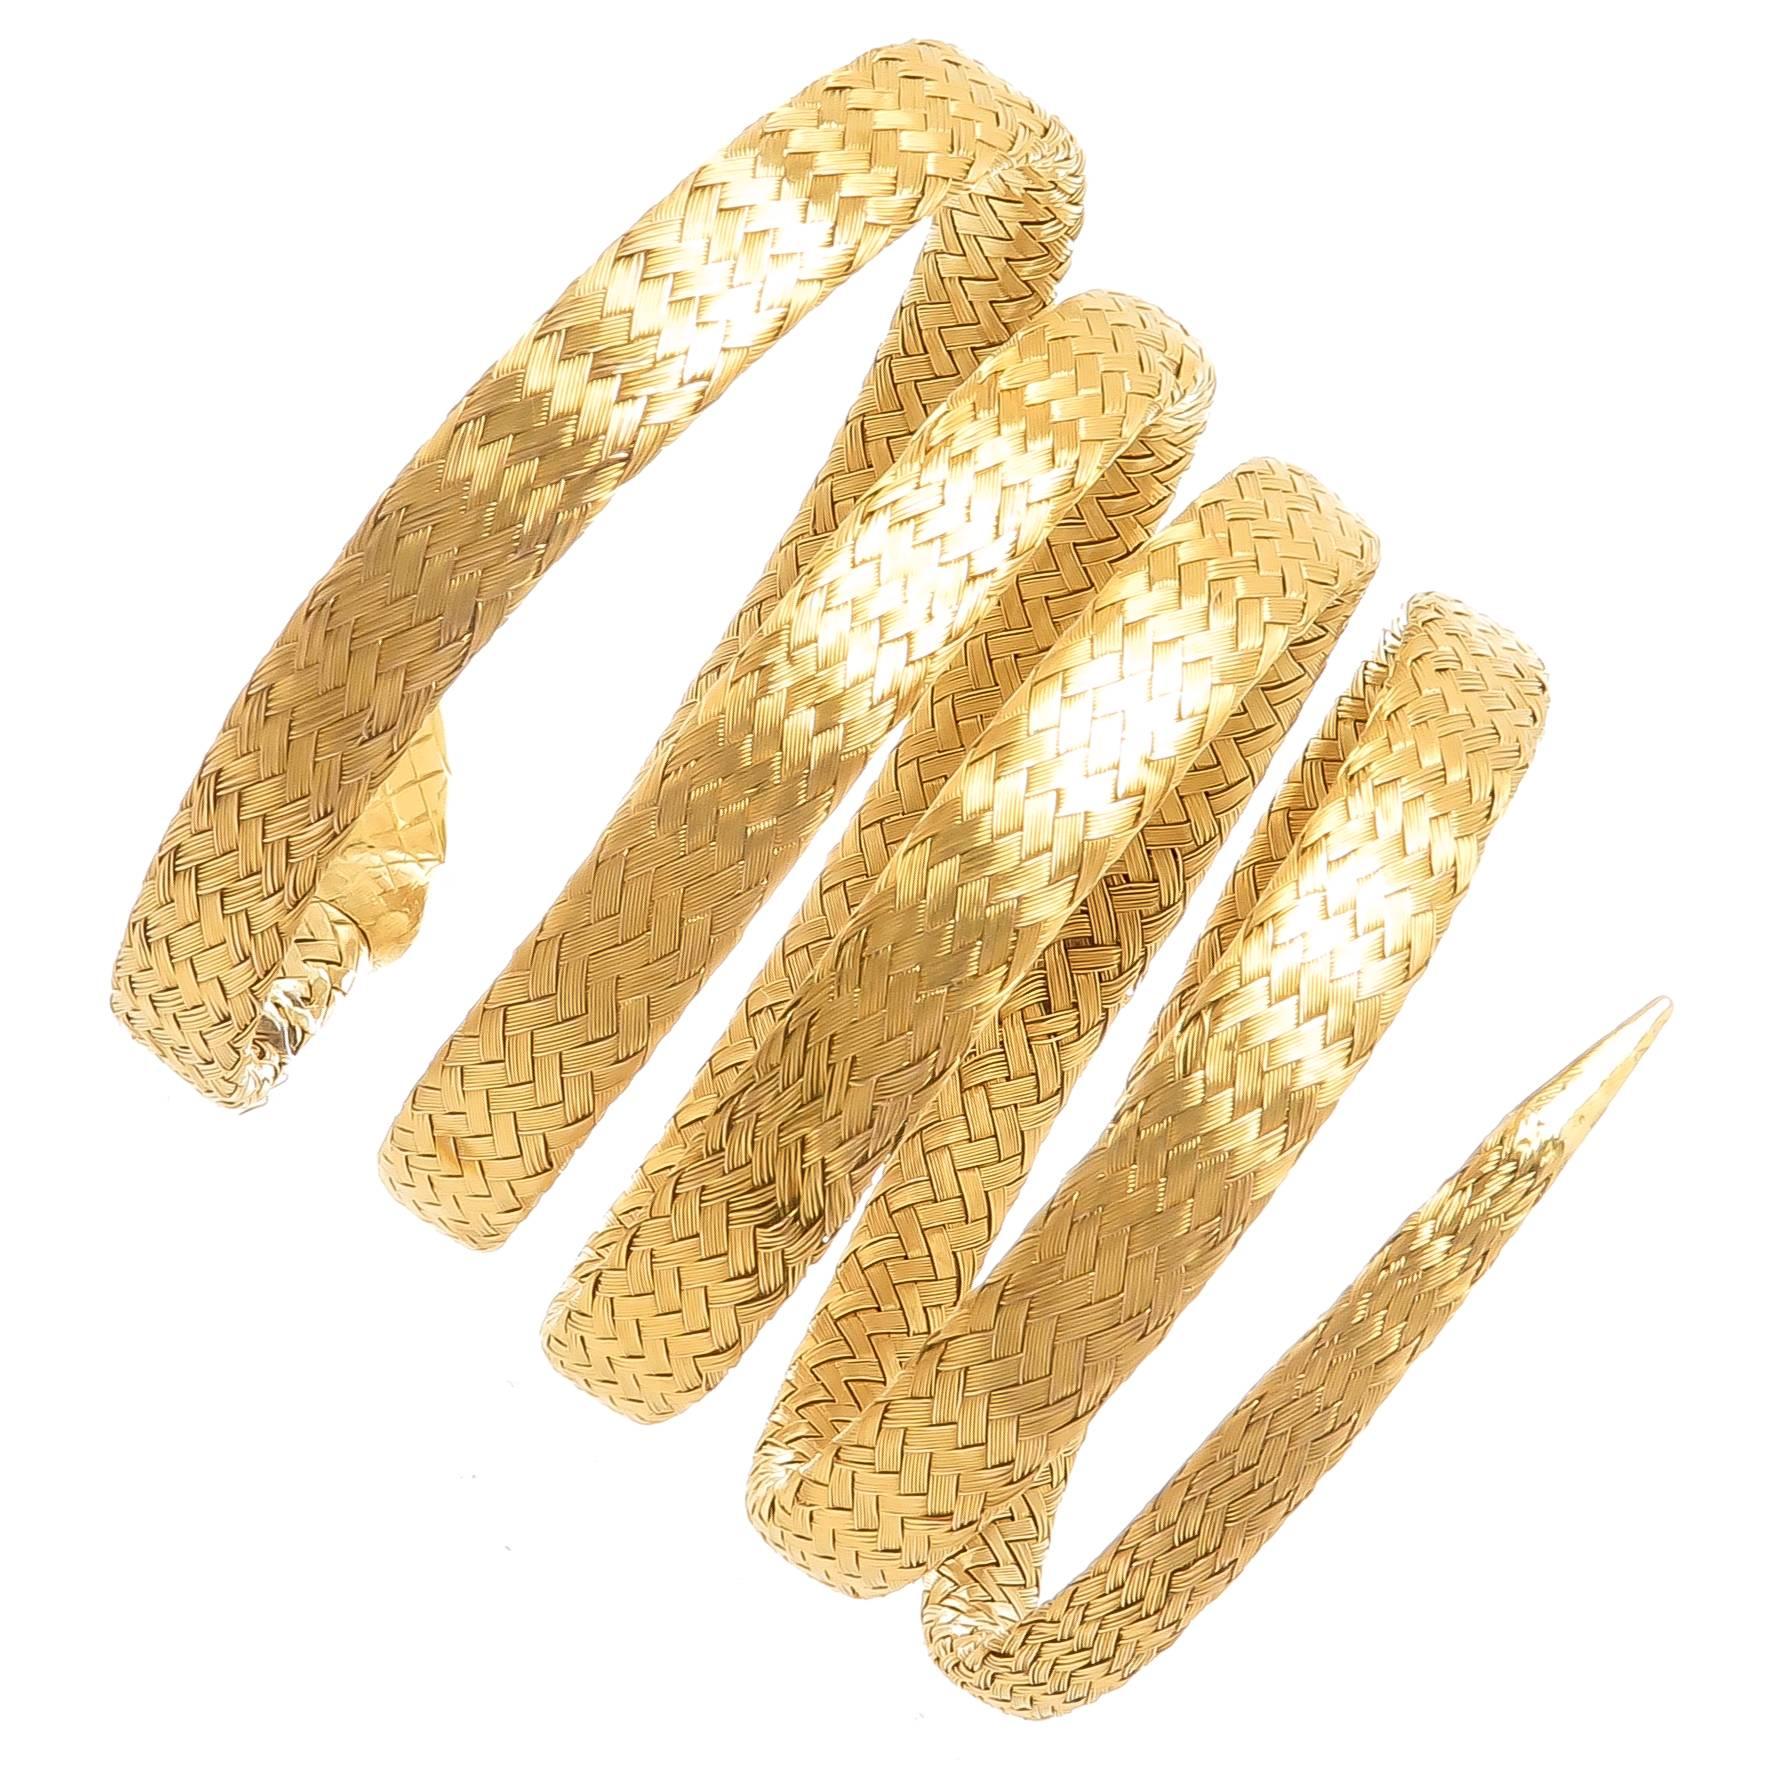 Circa 1910 French 18K Yellow Gold, coiled Snake Bracelet,  woven gold over a piece of light metal for springing, coiling movement. measuring 1.5 inch wide with each section being 1/4 inch. A very detailed Head set with an old Mine Cut Diamond of